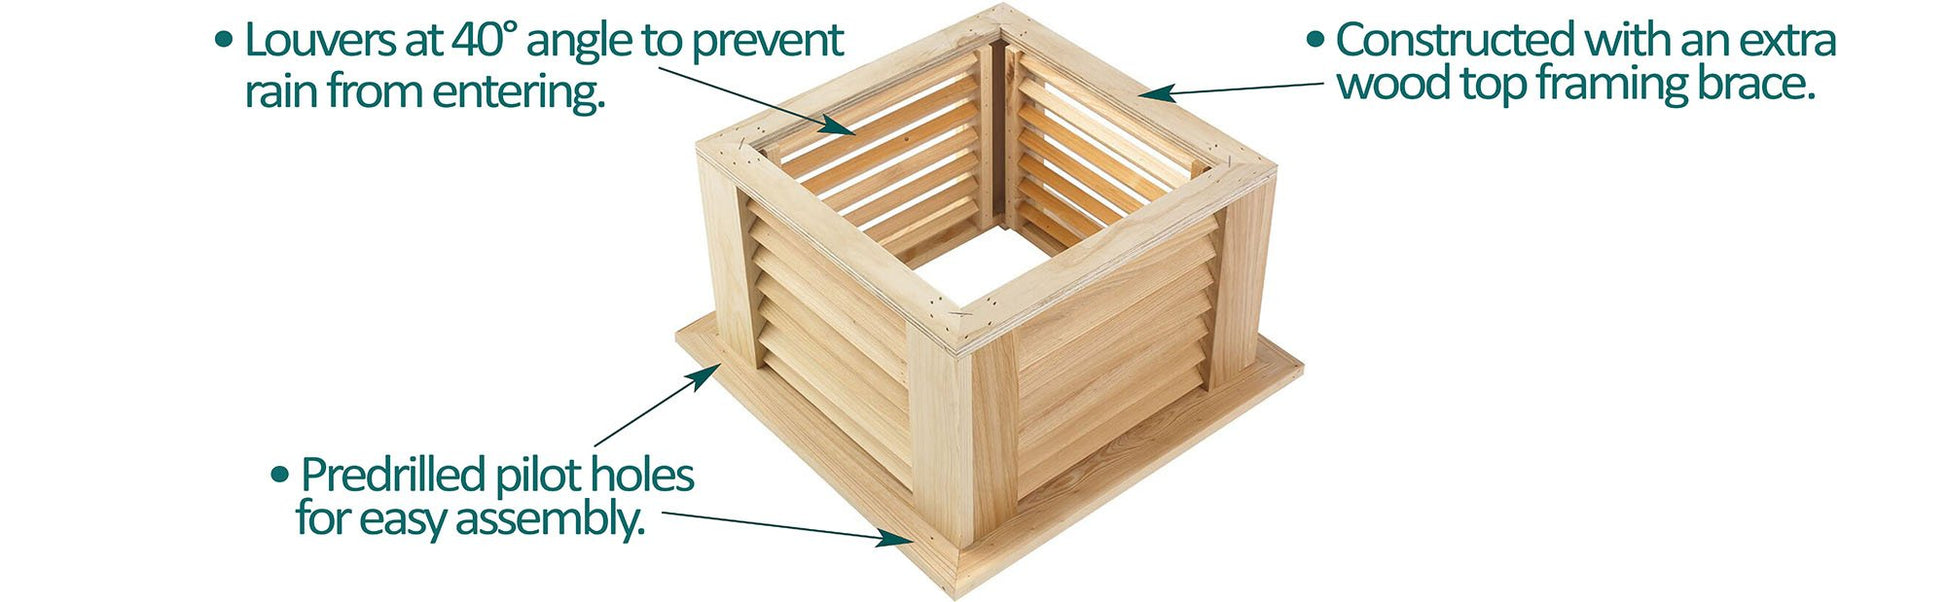 Coventry Wood Cupola - Good Directions